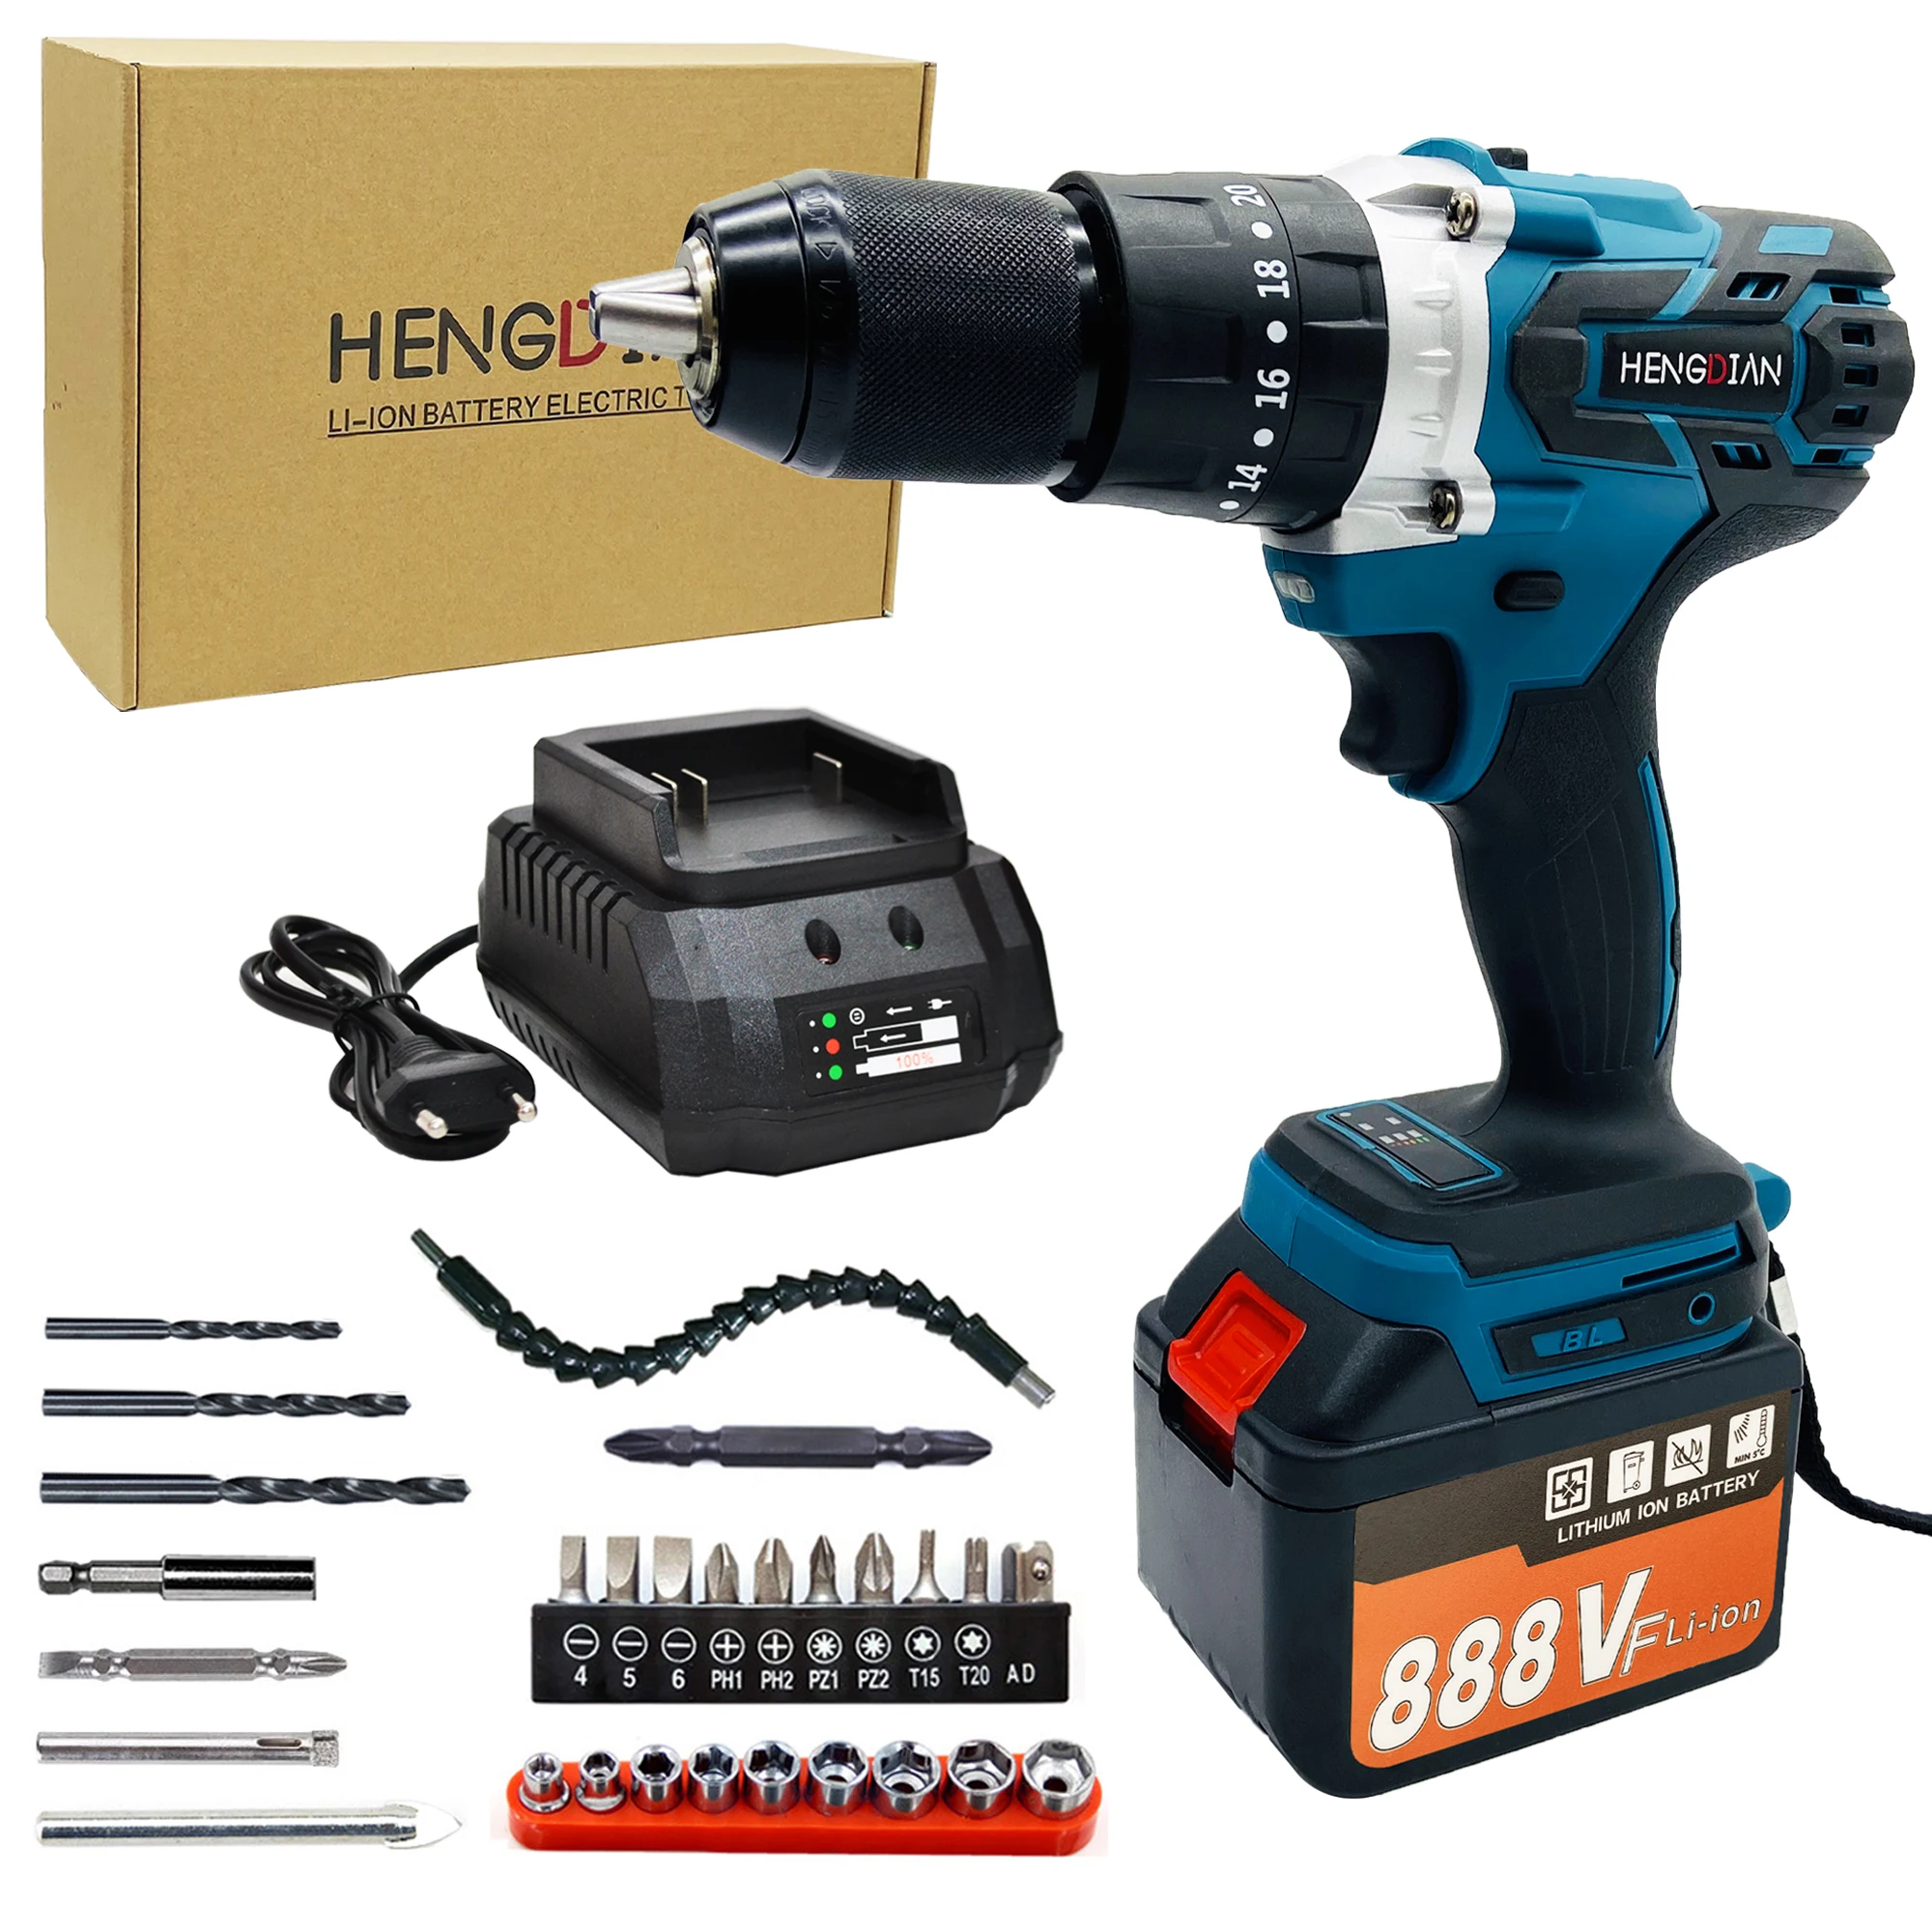 20V Brushless Battery Screwdriver Craft Drill Set Adjustable Torque Machine Impact Cordless Power Tools Electric Drill